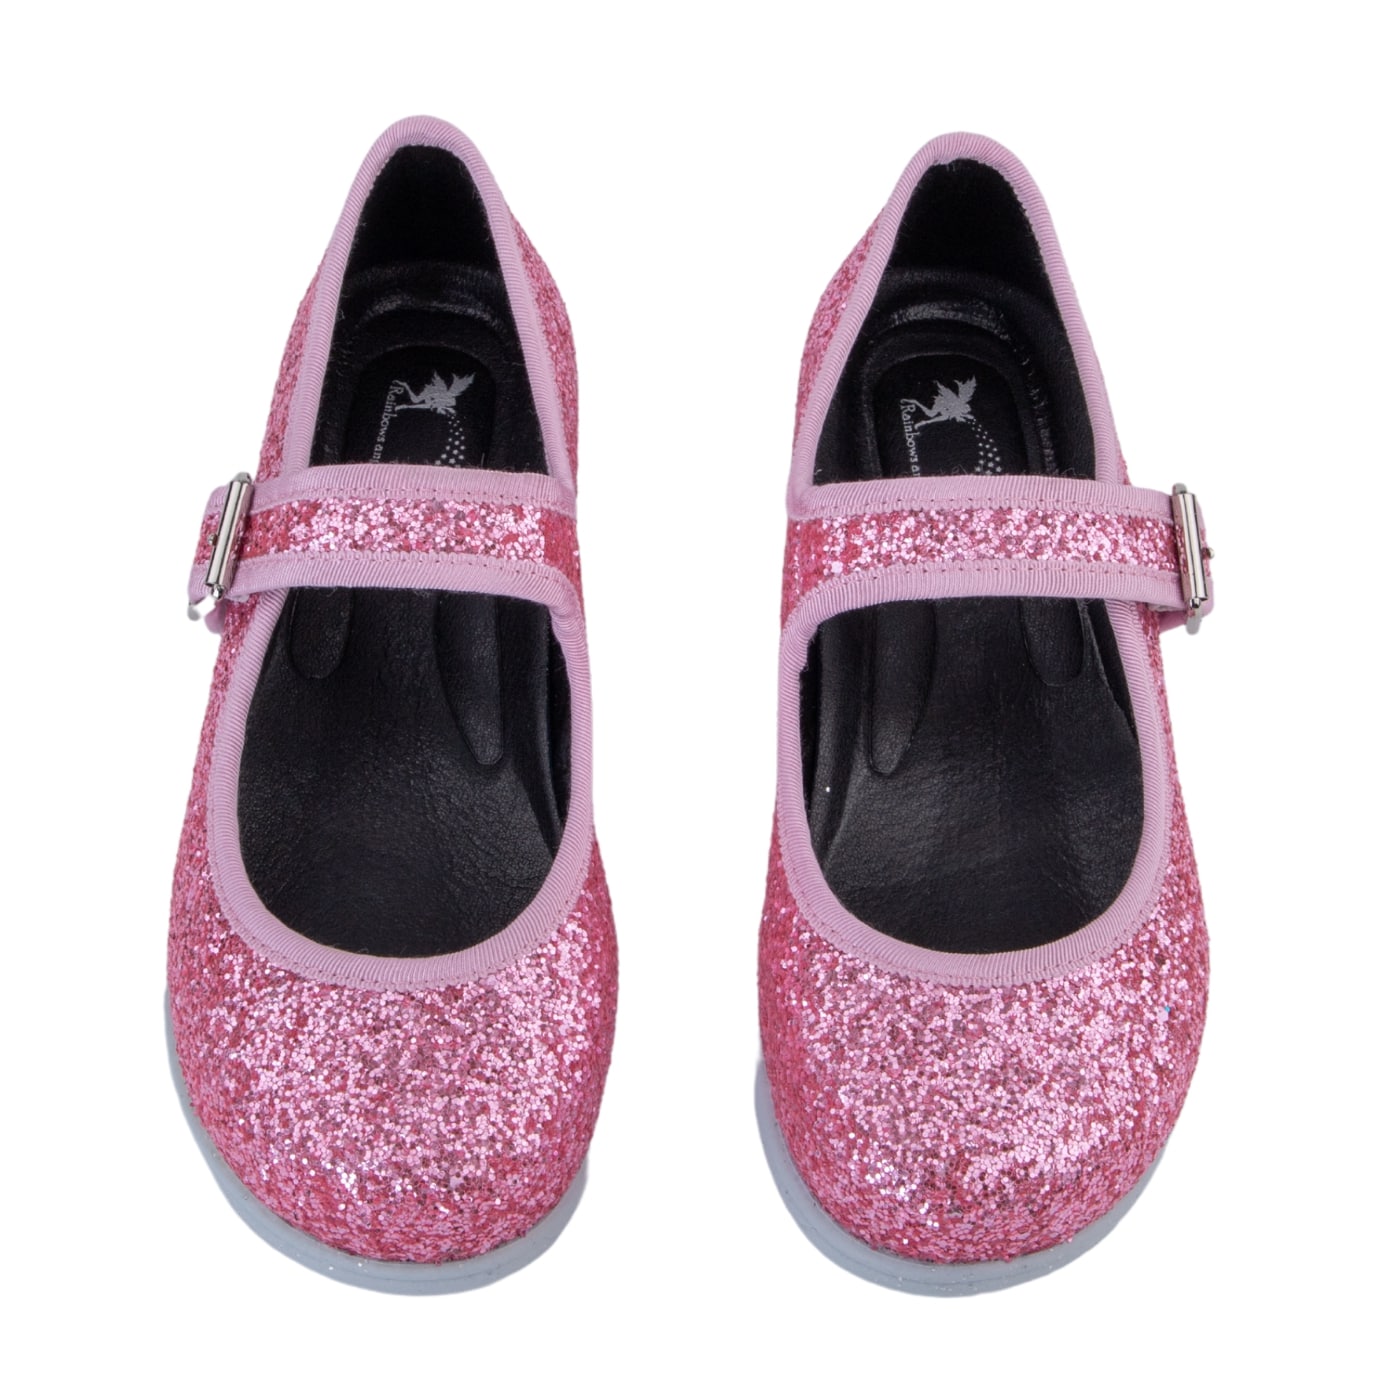 Fairy Floss Mary Janes by RainbowsAndFairies.com.au (Pink Glitter - Glitter Soles - Mismatched Shoes - Glitter Shoes - Sparkle) - SKU: FW_MARYJ_FRYFL_ORG - Pic-02